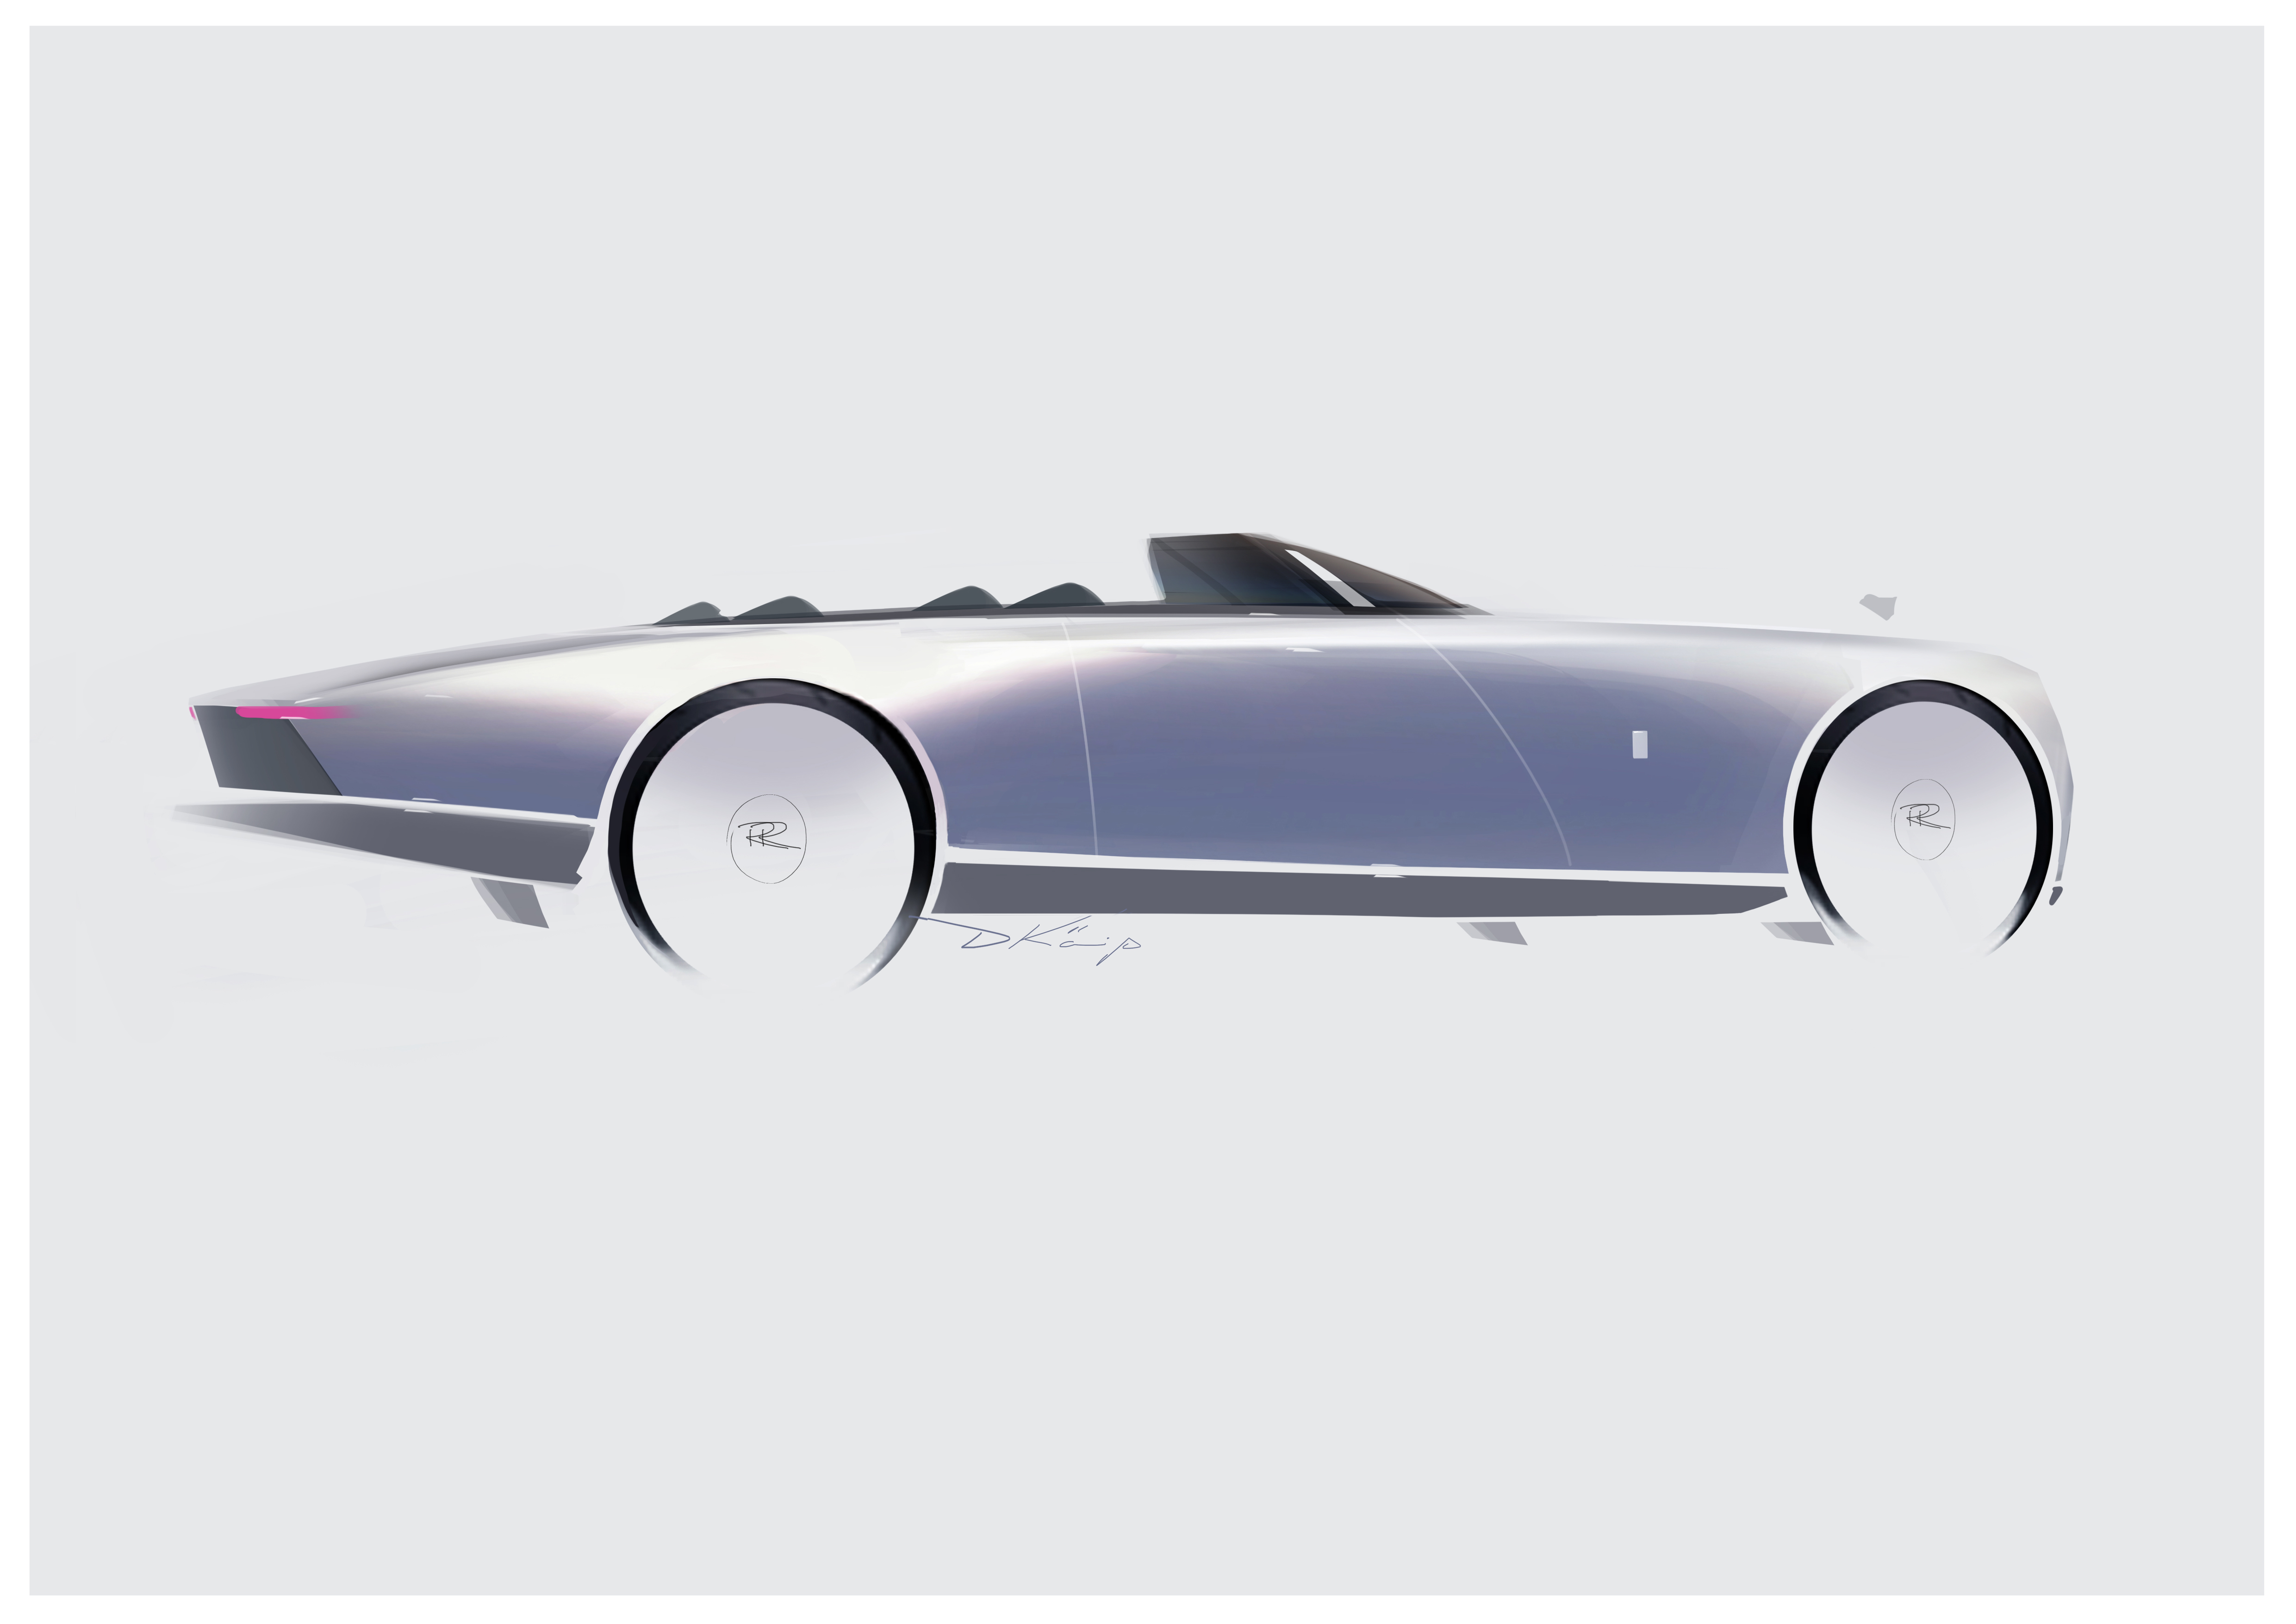 ROLLS-ROYCE 'BOAT TAIL'. A COUNTERPOINT TO INDUSTRIALISED LUXURY